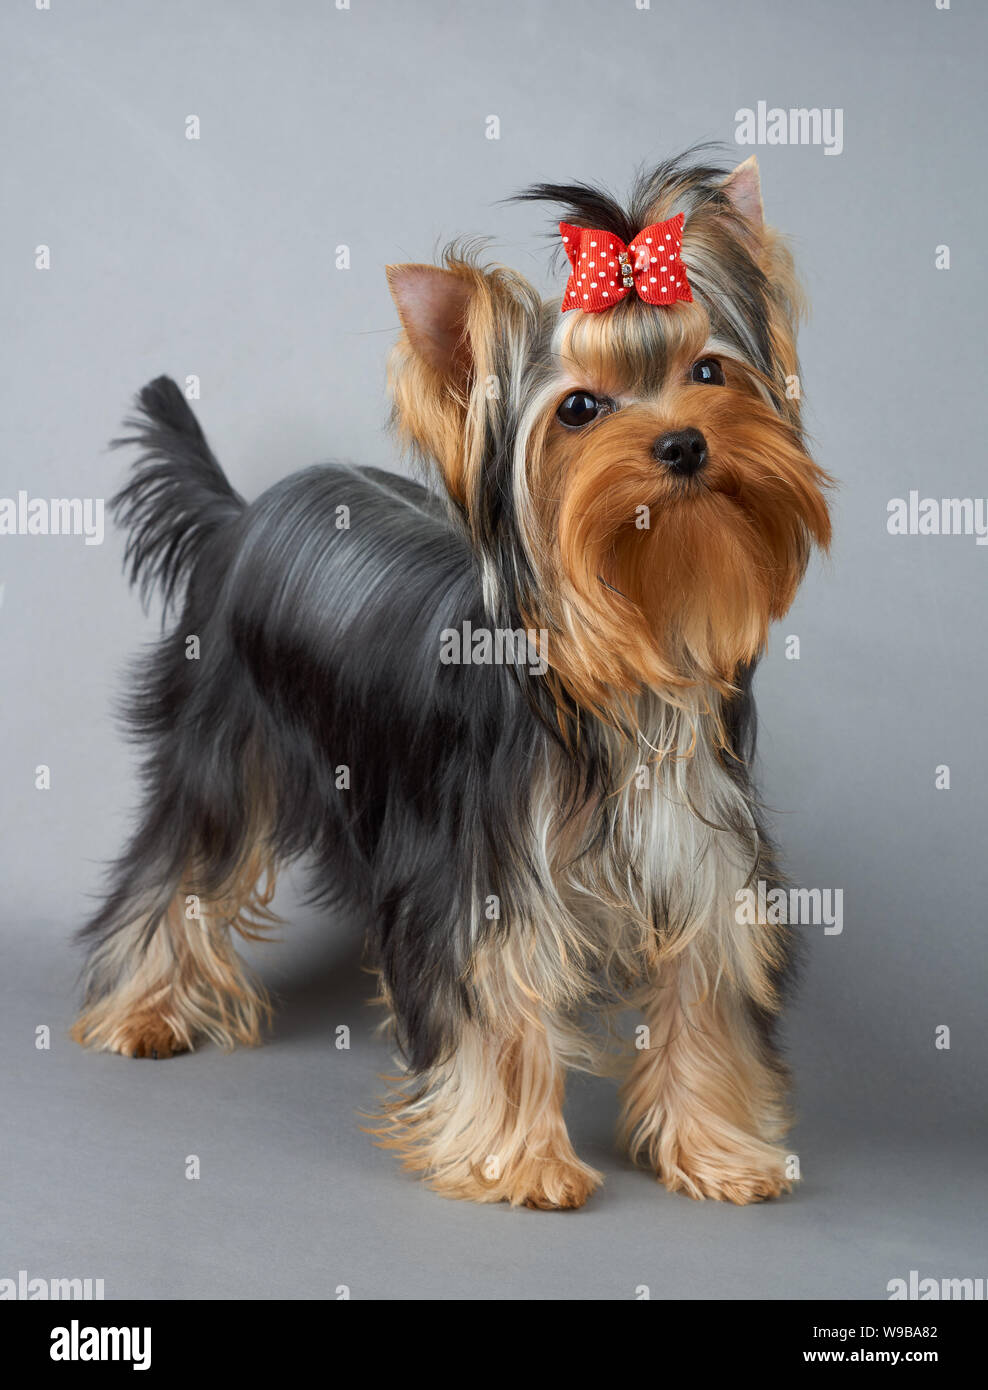 One cute Yorkshire Terrier with red hair bow stands on gray background Stock Photo